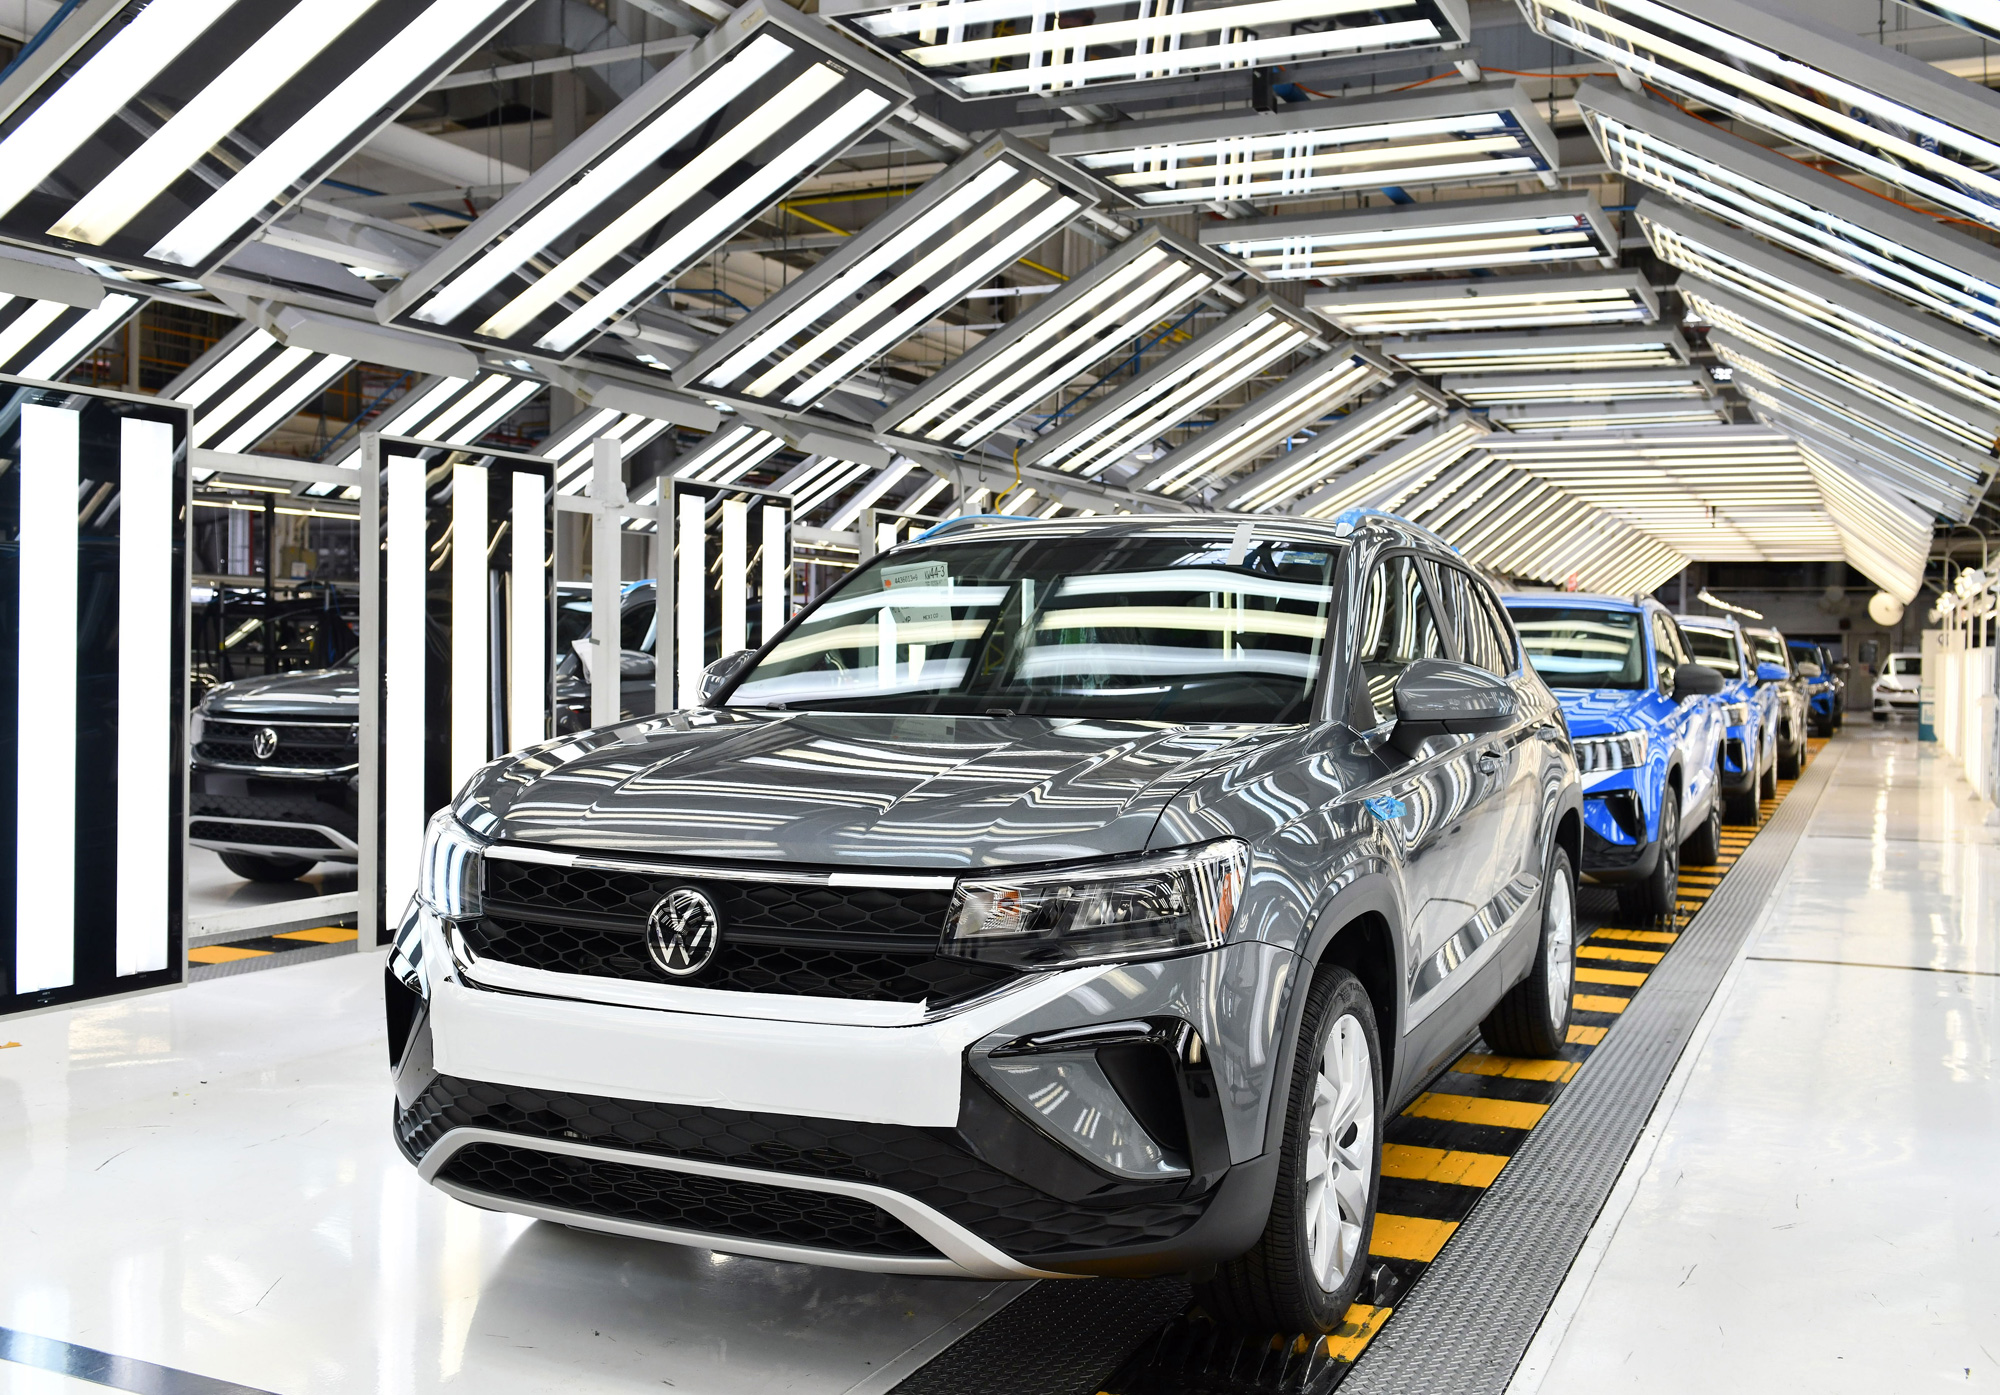 Volkswagen de México starts exporting the Taos to the United States